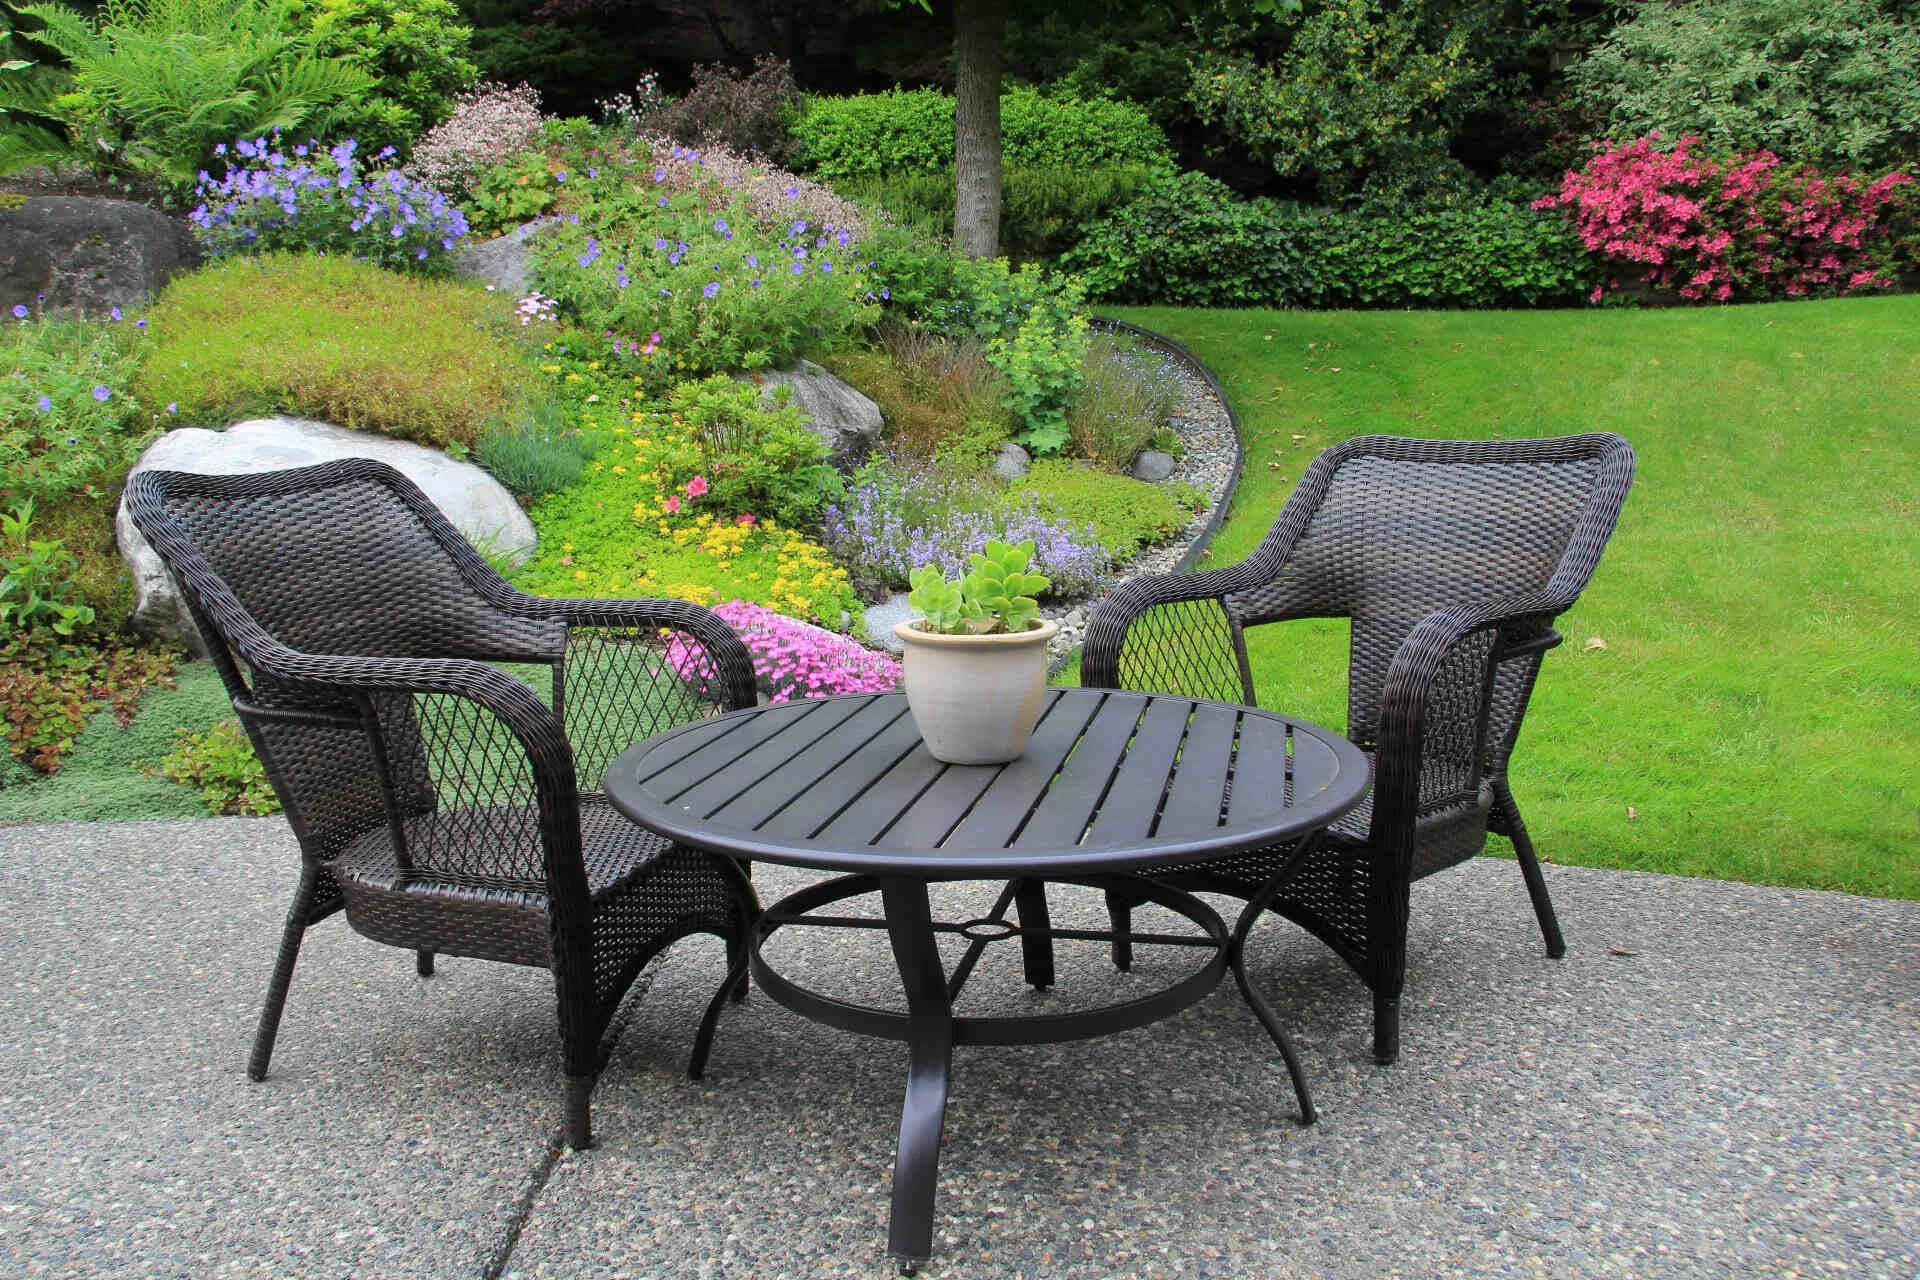 What Outdoor Furniture Is The Most Durable?